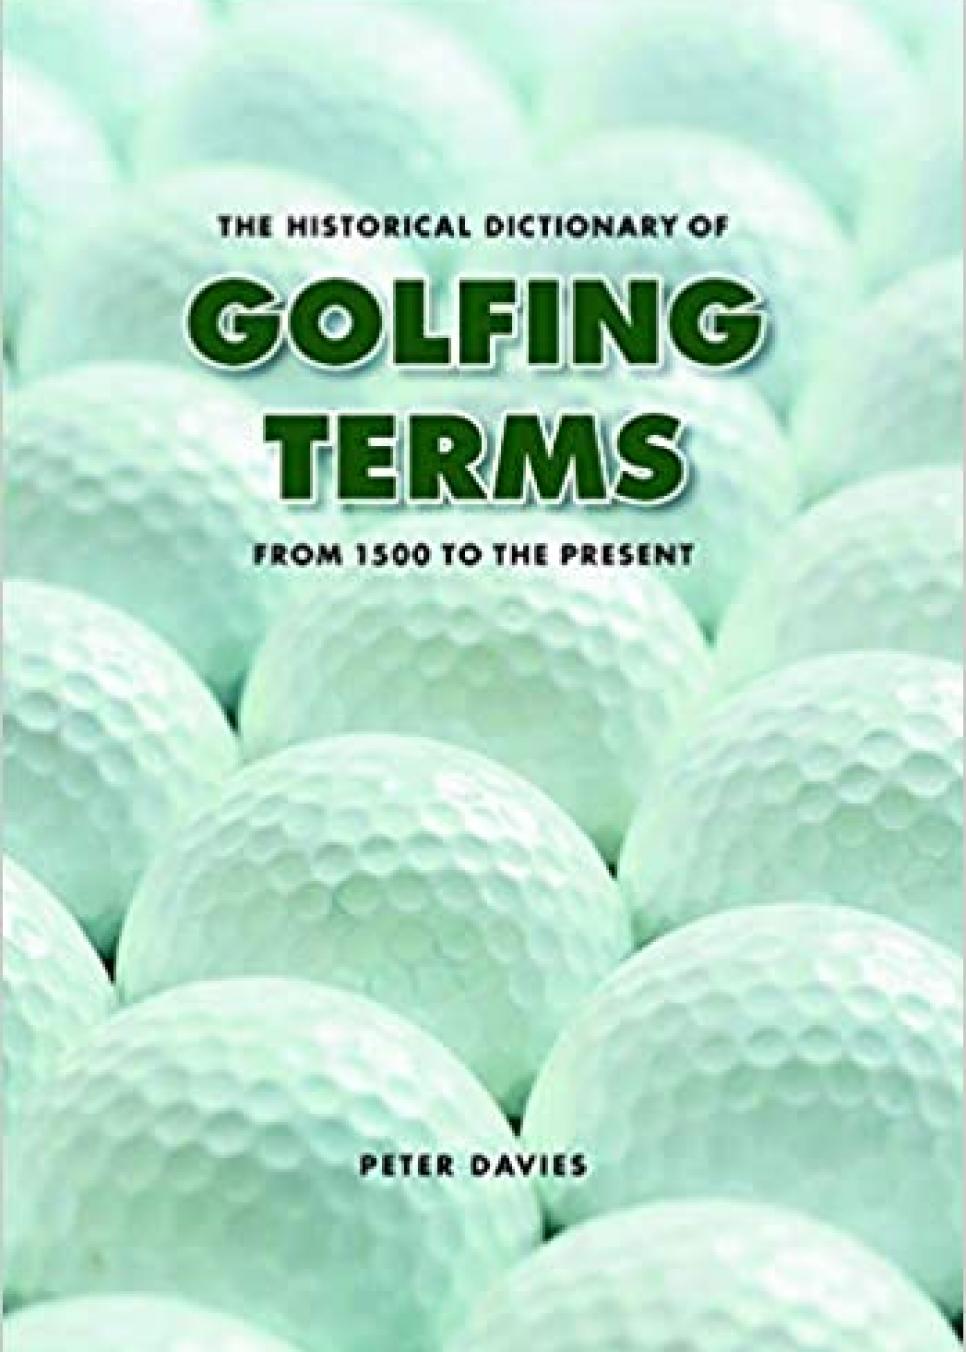 rx-amazonthe-historical-dictionary-of-golfing-terms-by-peter-davies-1980.jpeg